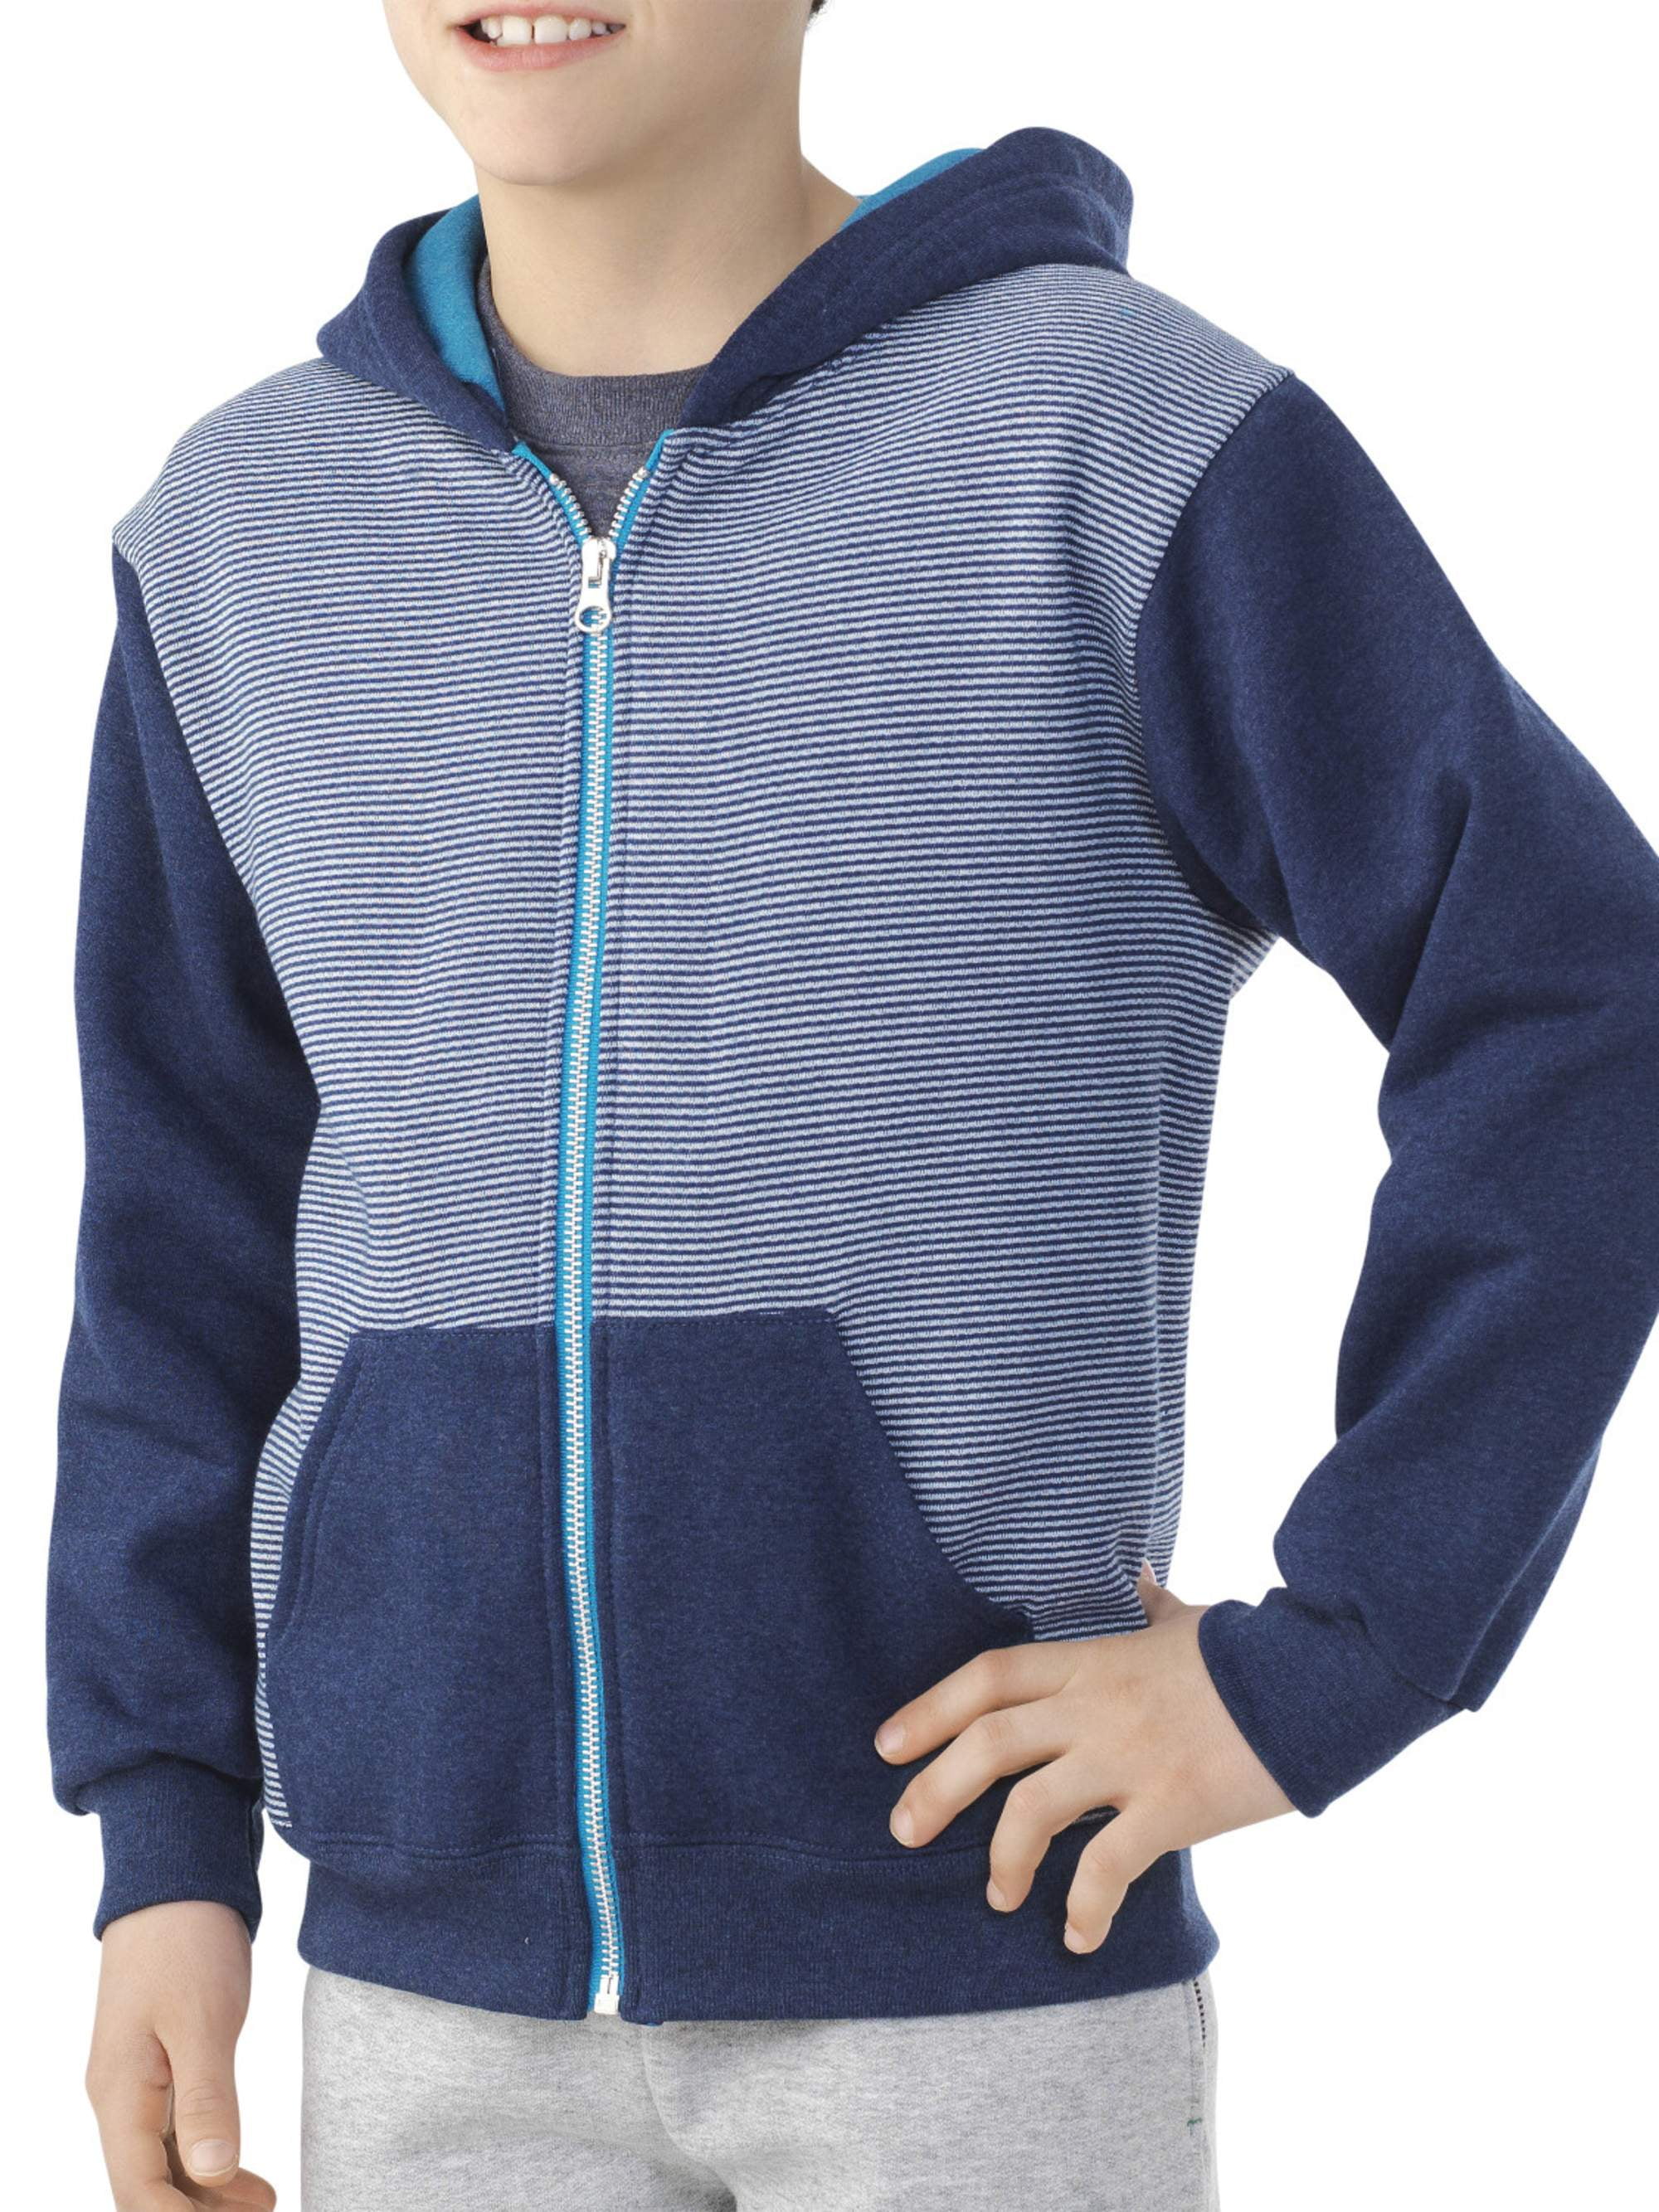 STAR WARS:FULL ZIP FLEECE 5//6YR,NEW WITH TAGS